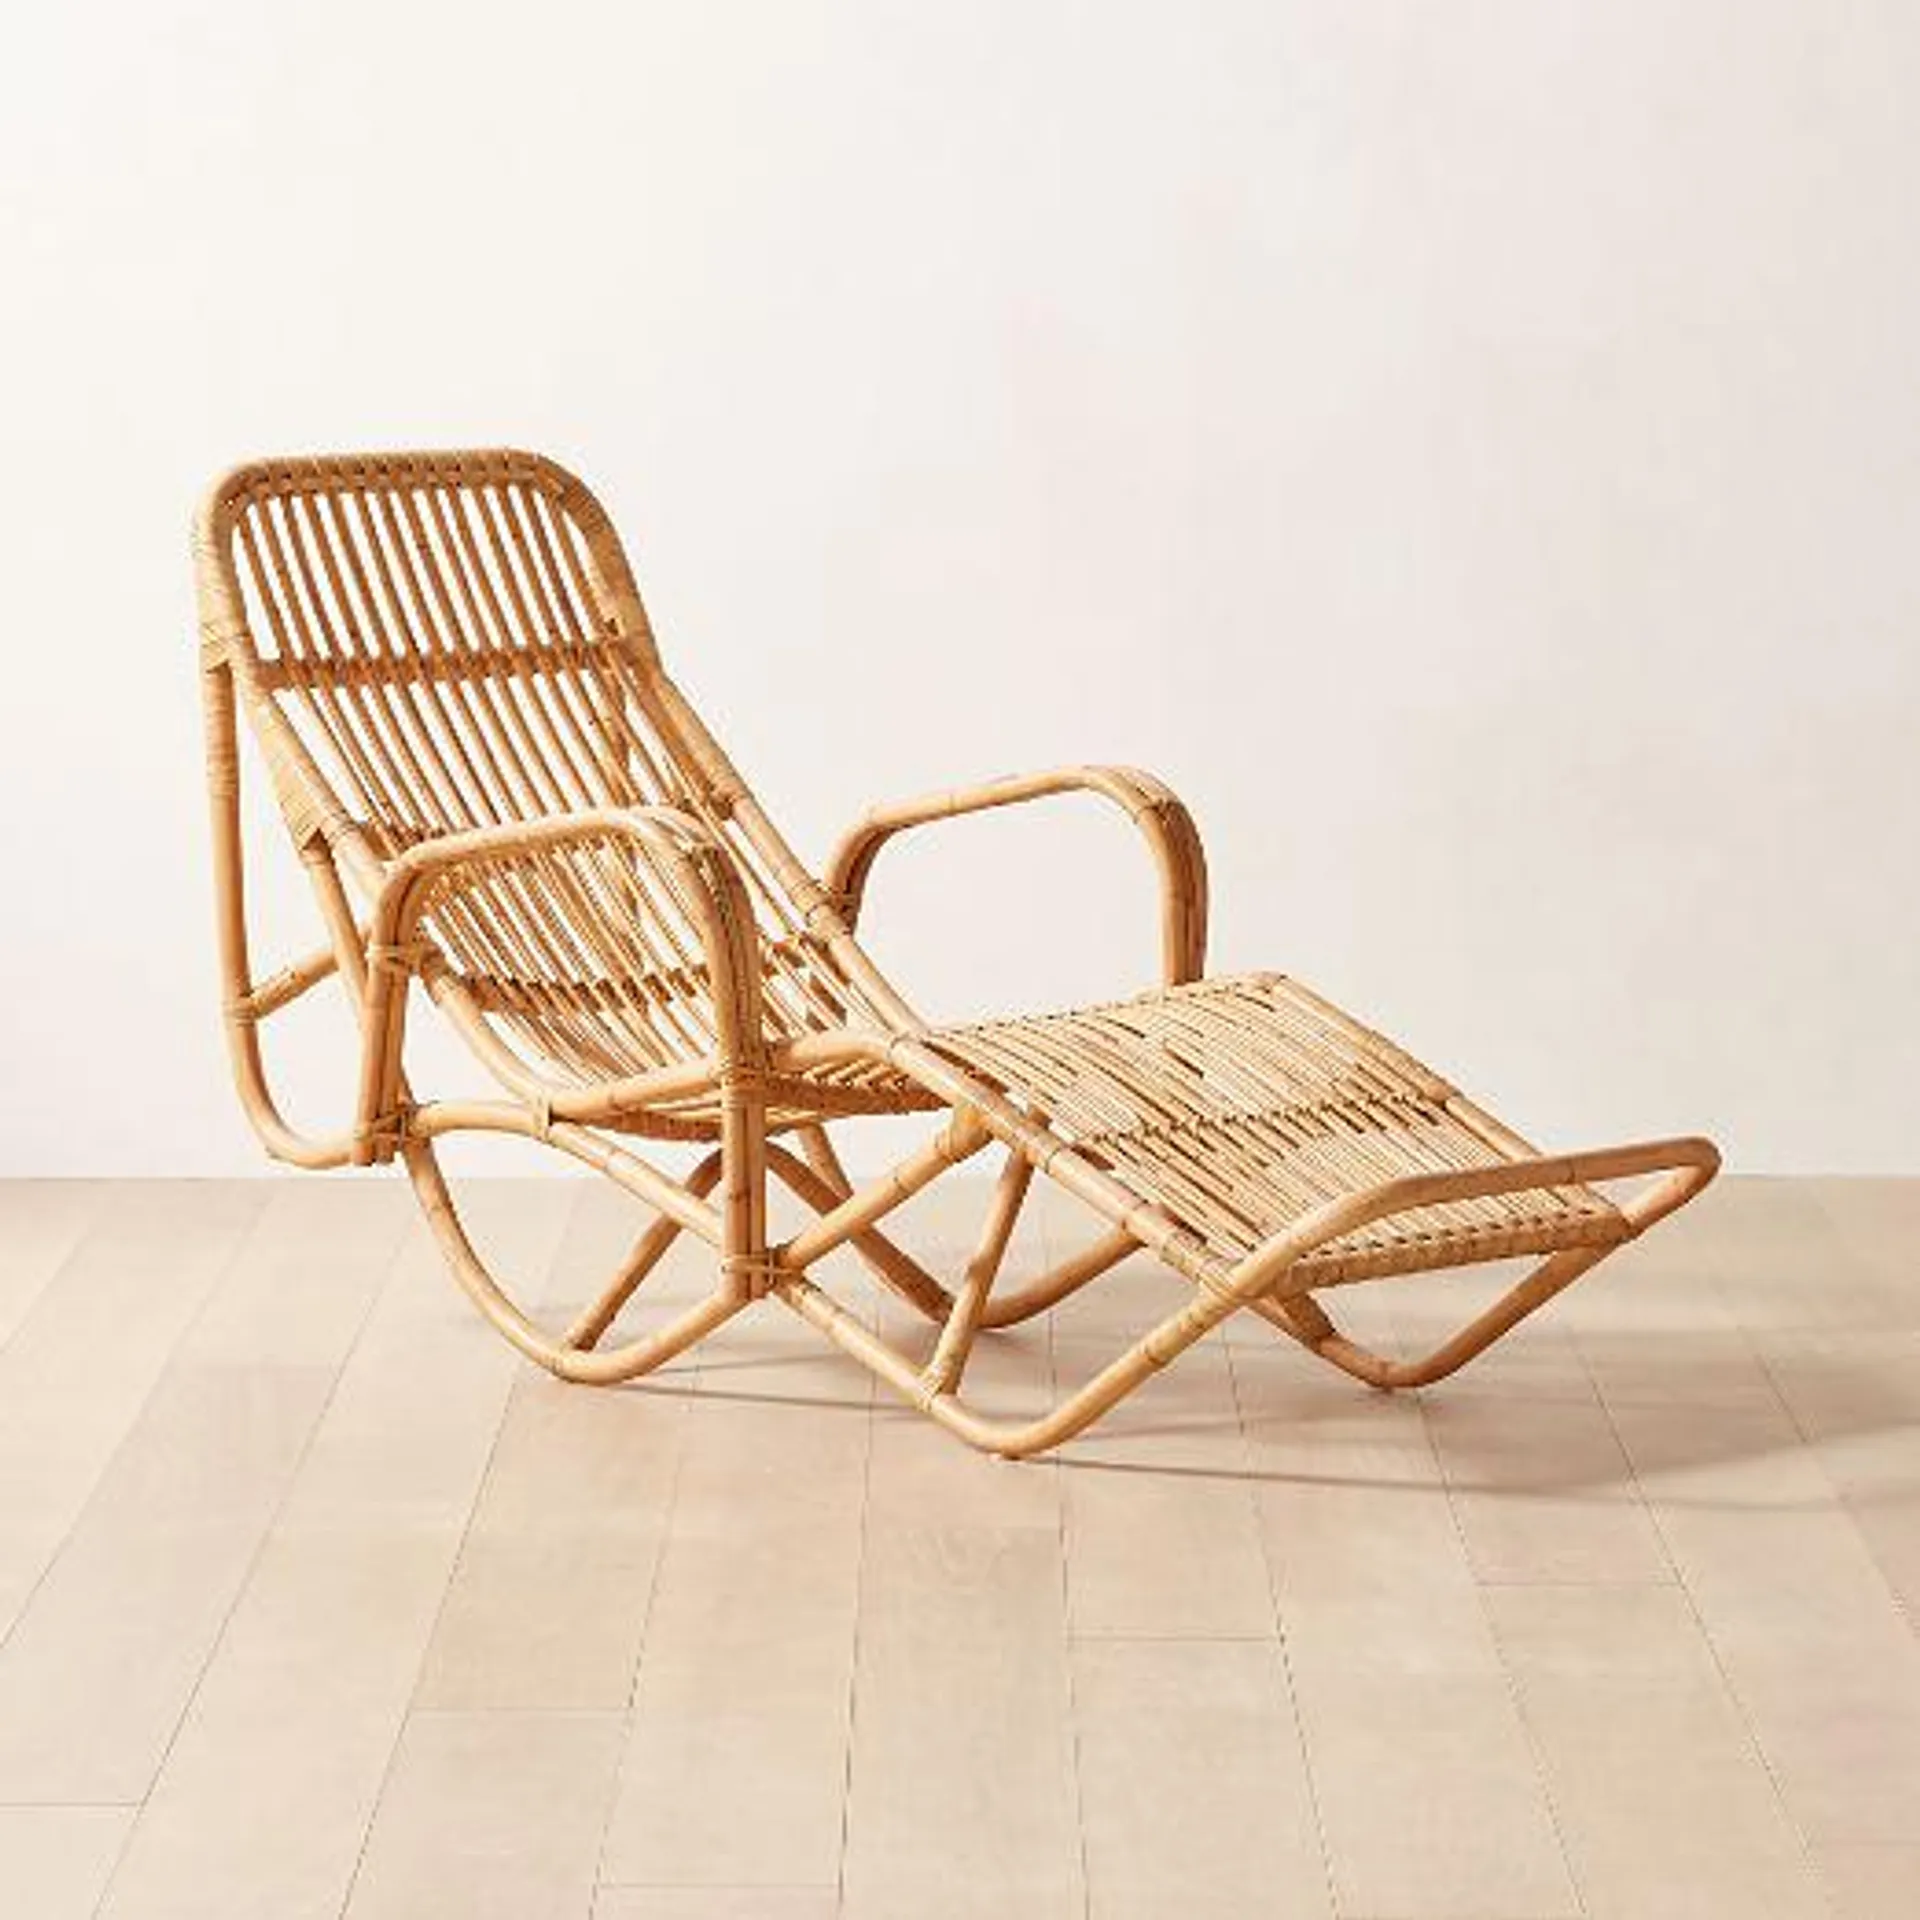 Wengler Reclining Rattan Chaise Lounge